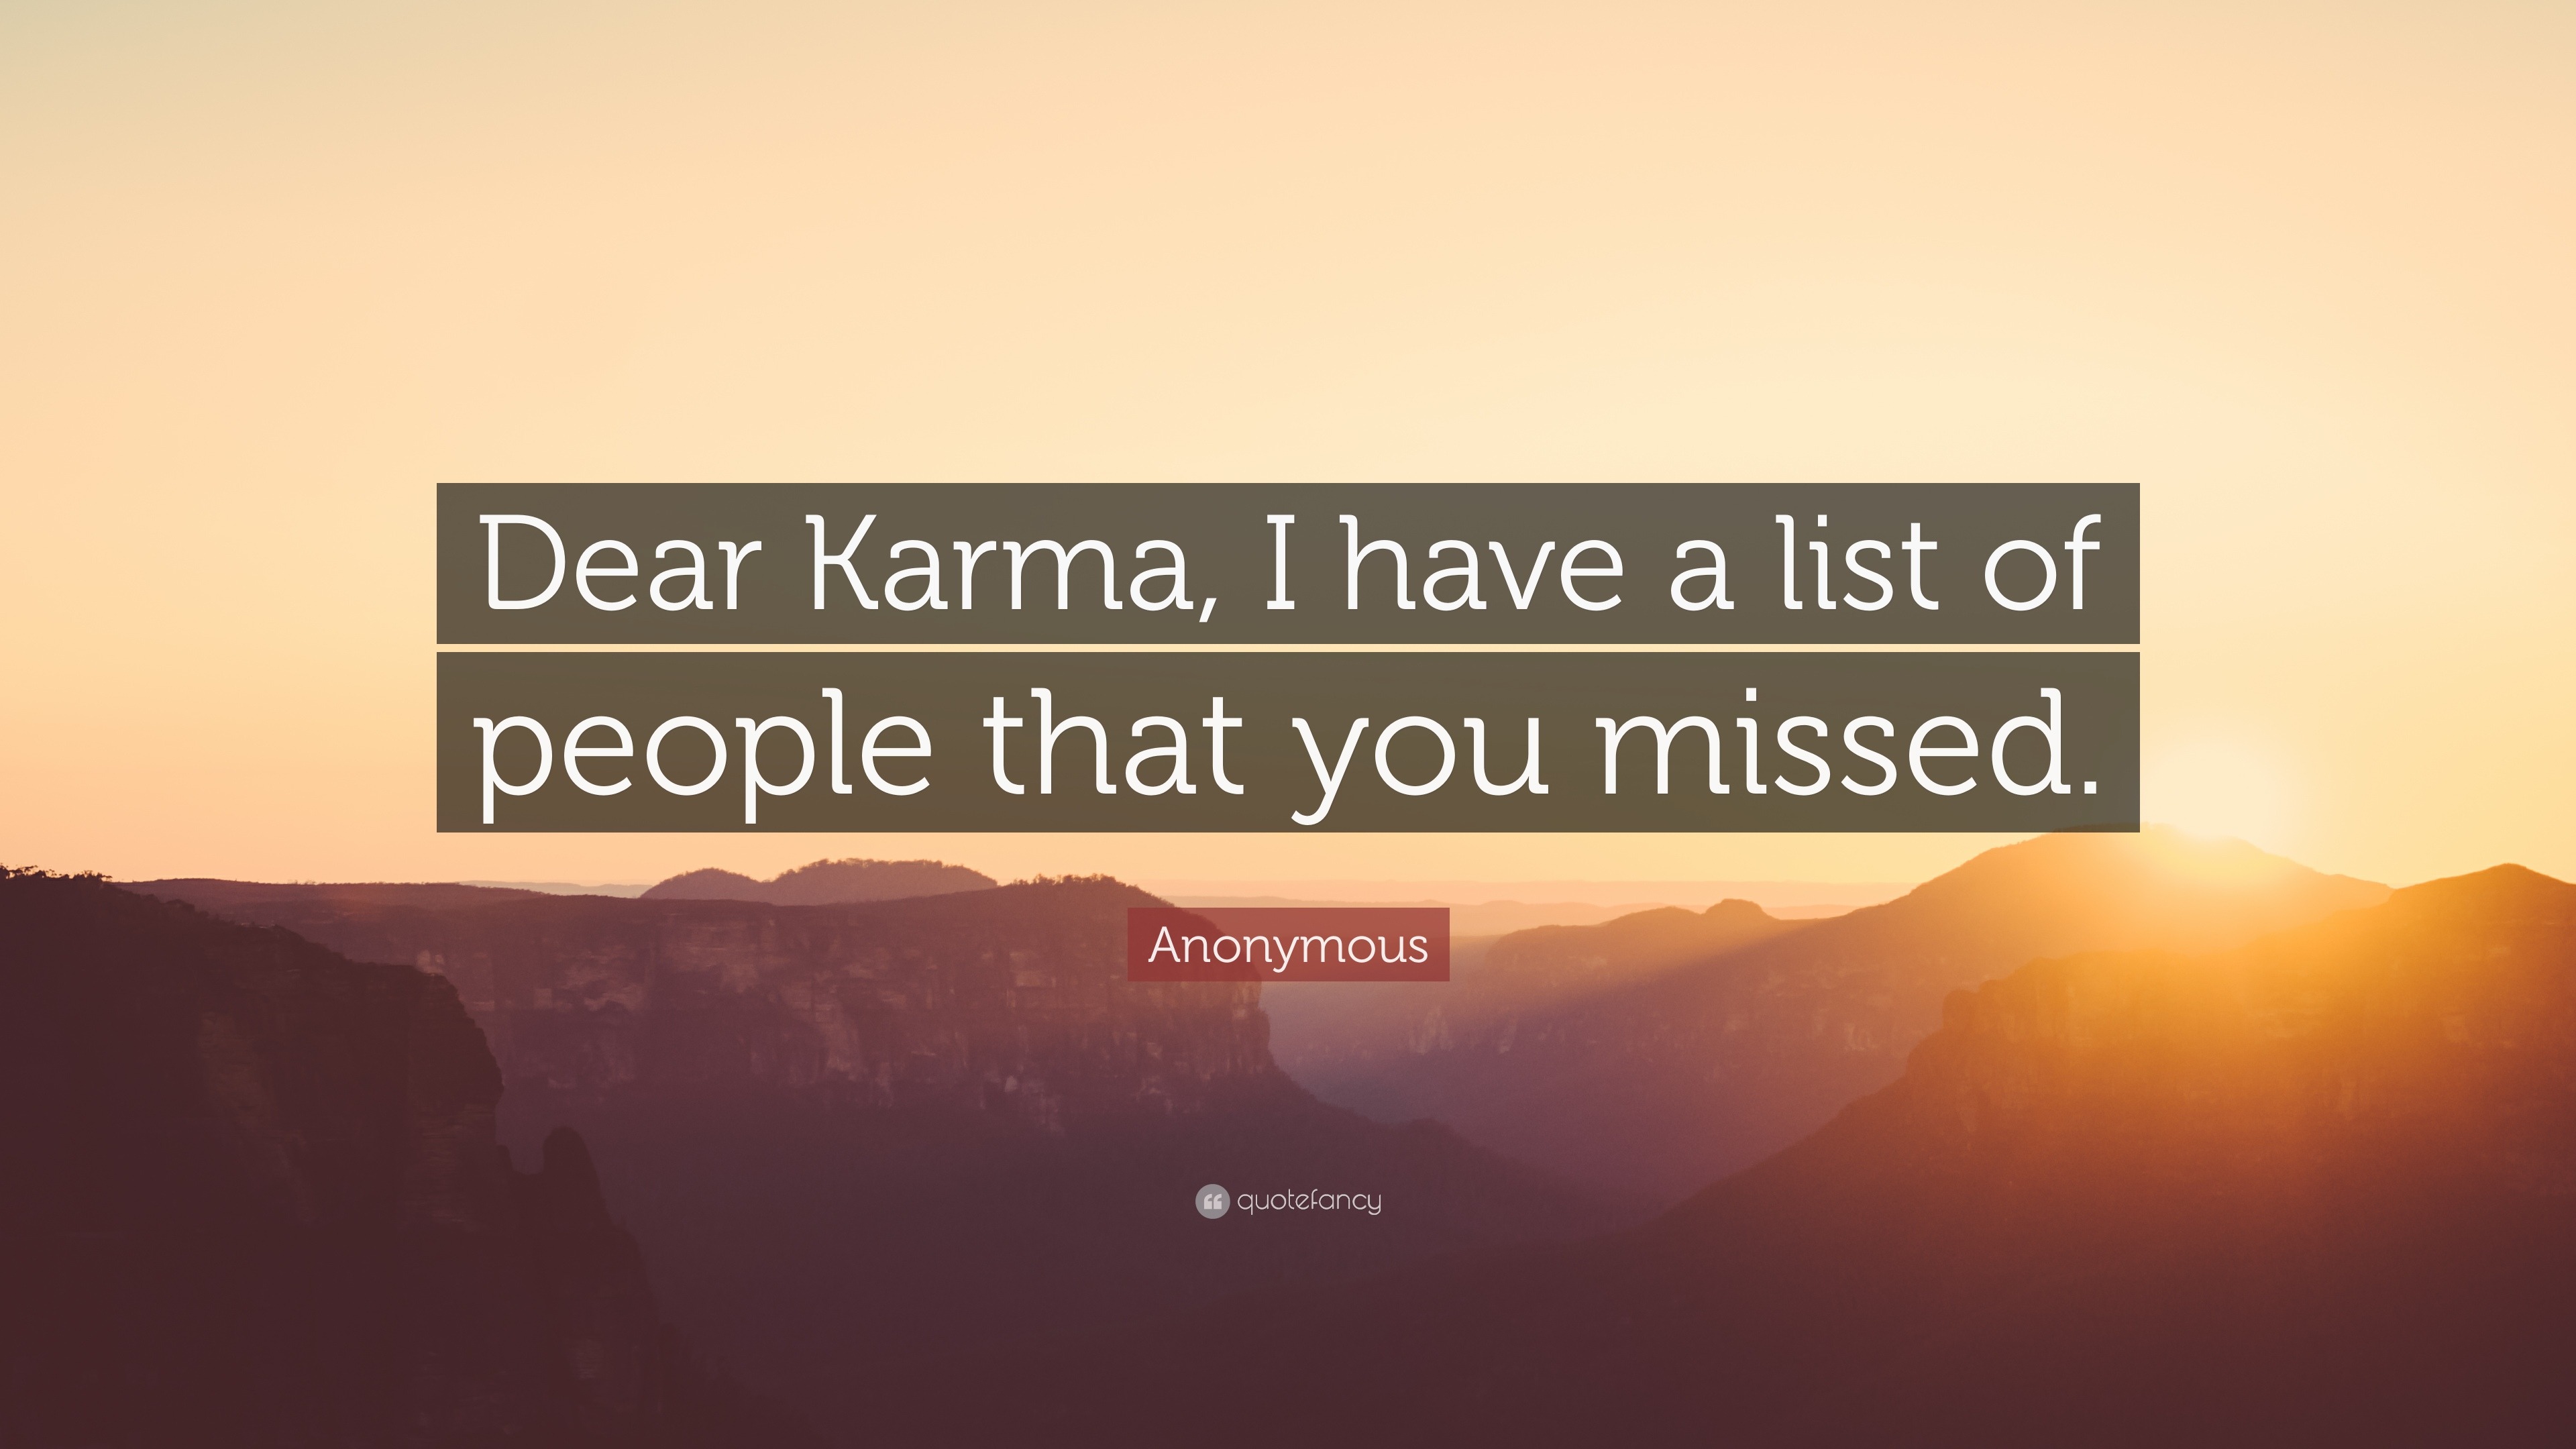 Anonymous Quote: “Dear Karma, I have a list of people that you missed